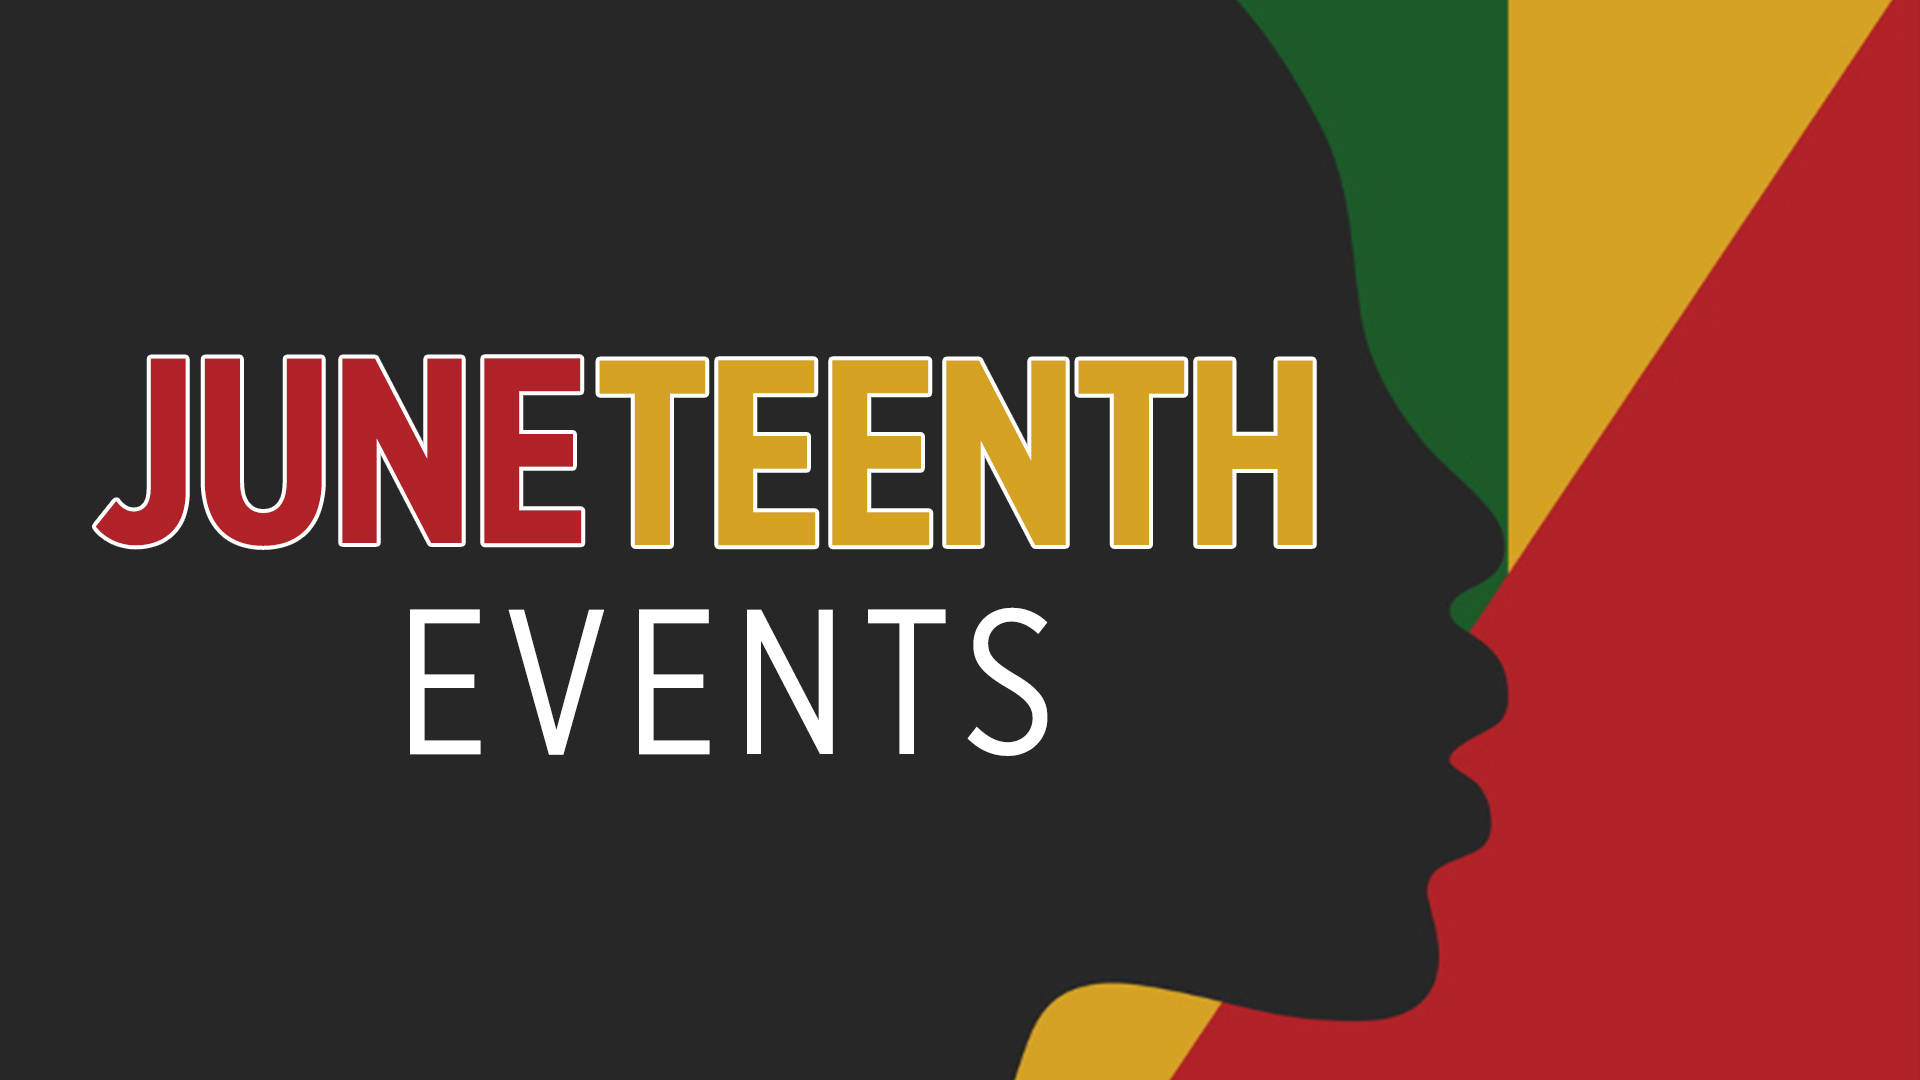 Colorful Juneteenth Events Wallpaper